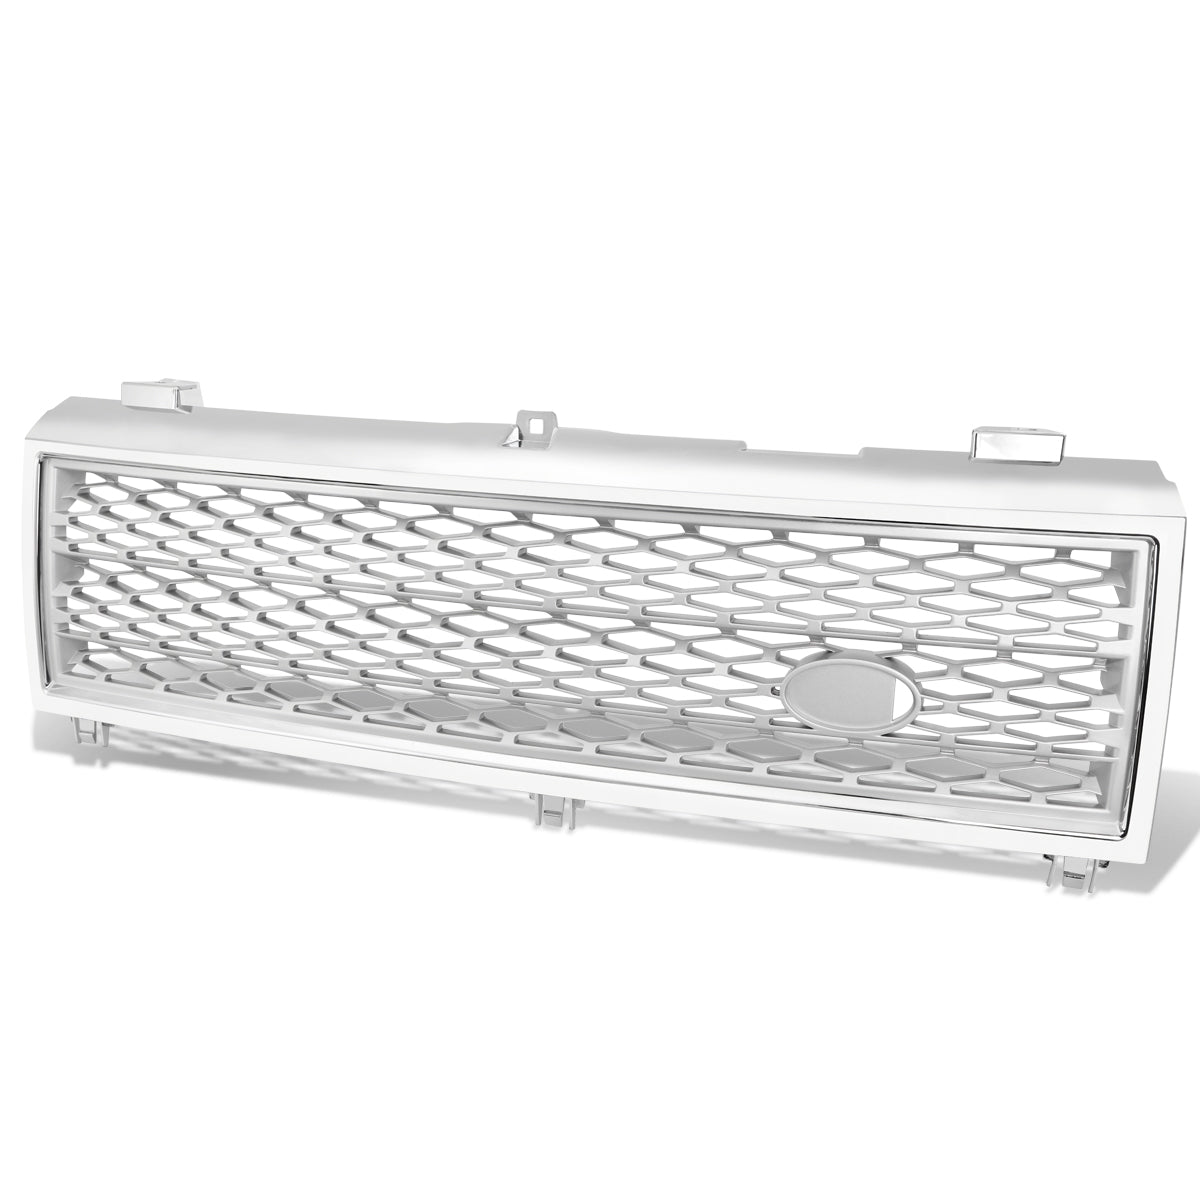 03-05 Land Rover Range Rover HSE Front Grille Frame - Chrome/Silver